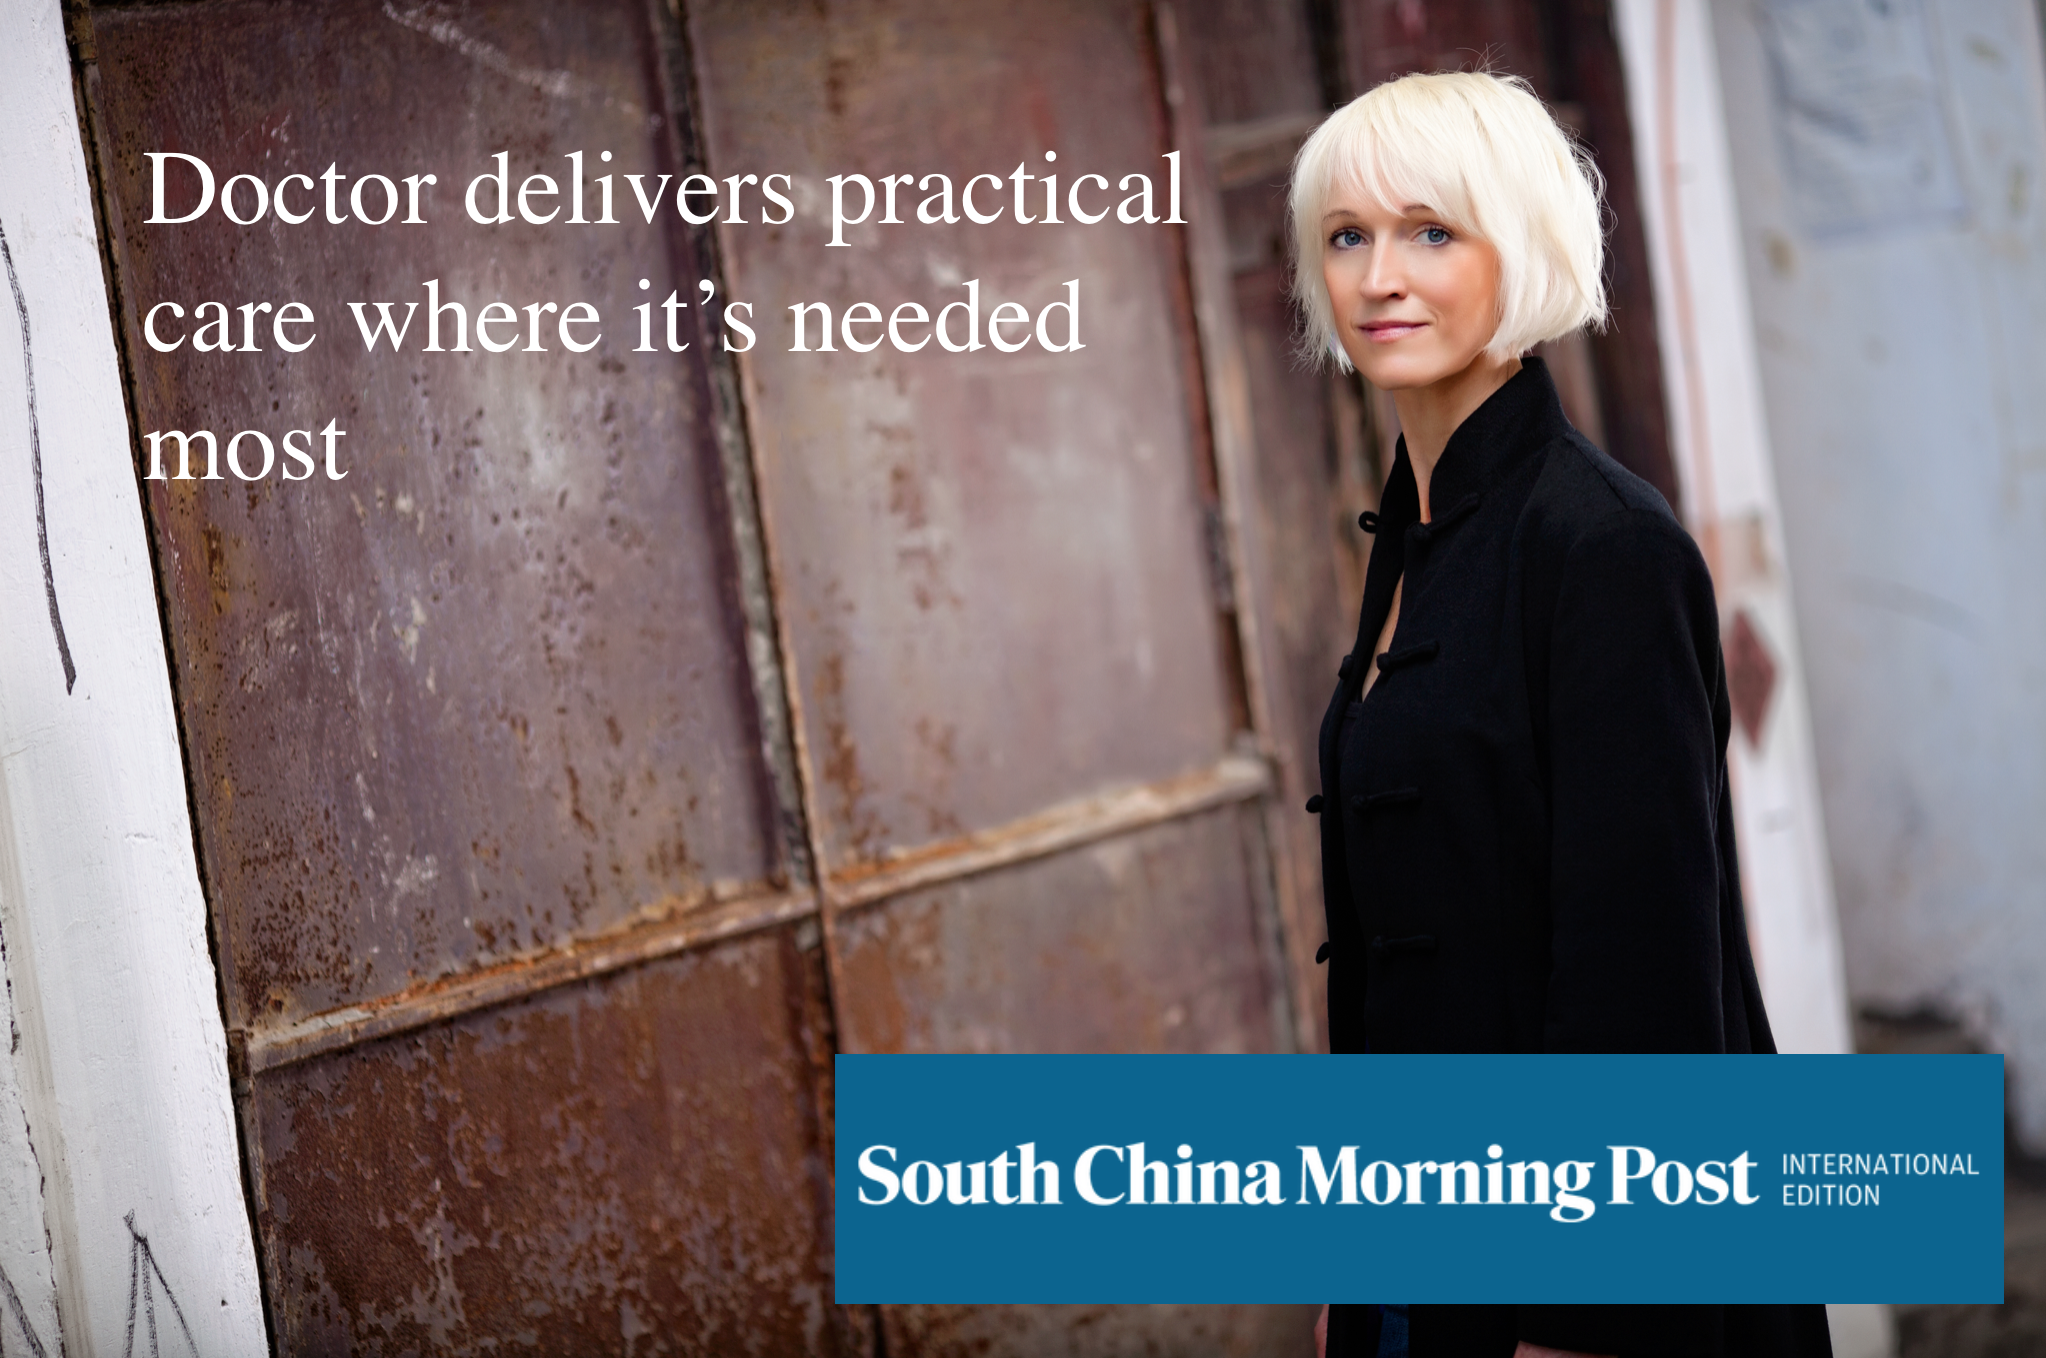 Dr Marie Charles feature interview for the South China Morning Post